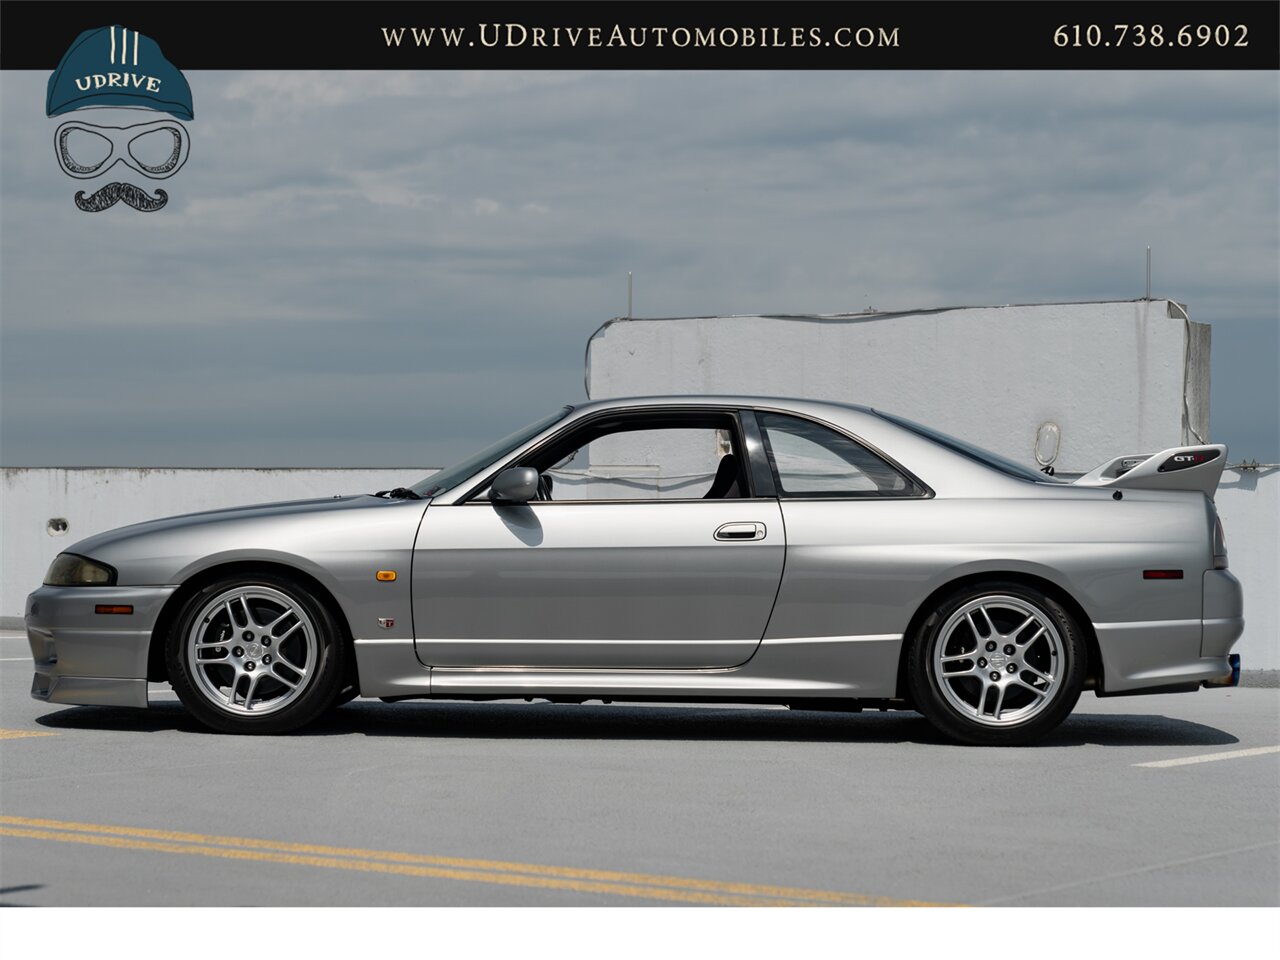 1997 Nissan Skyline GT-R R33 28k Miles Collector Grade  Motorex Legally Imported Titled Federalized Service History - Photo 9 - West Chester, PA 19382